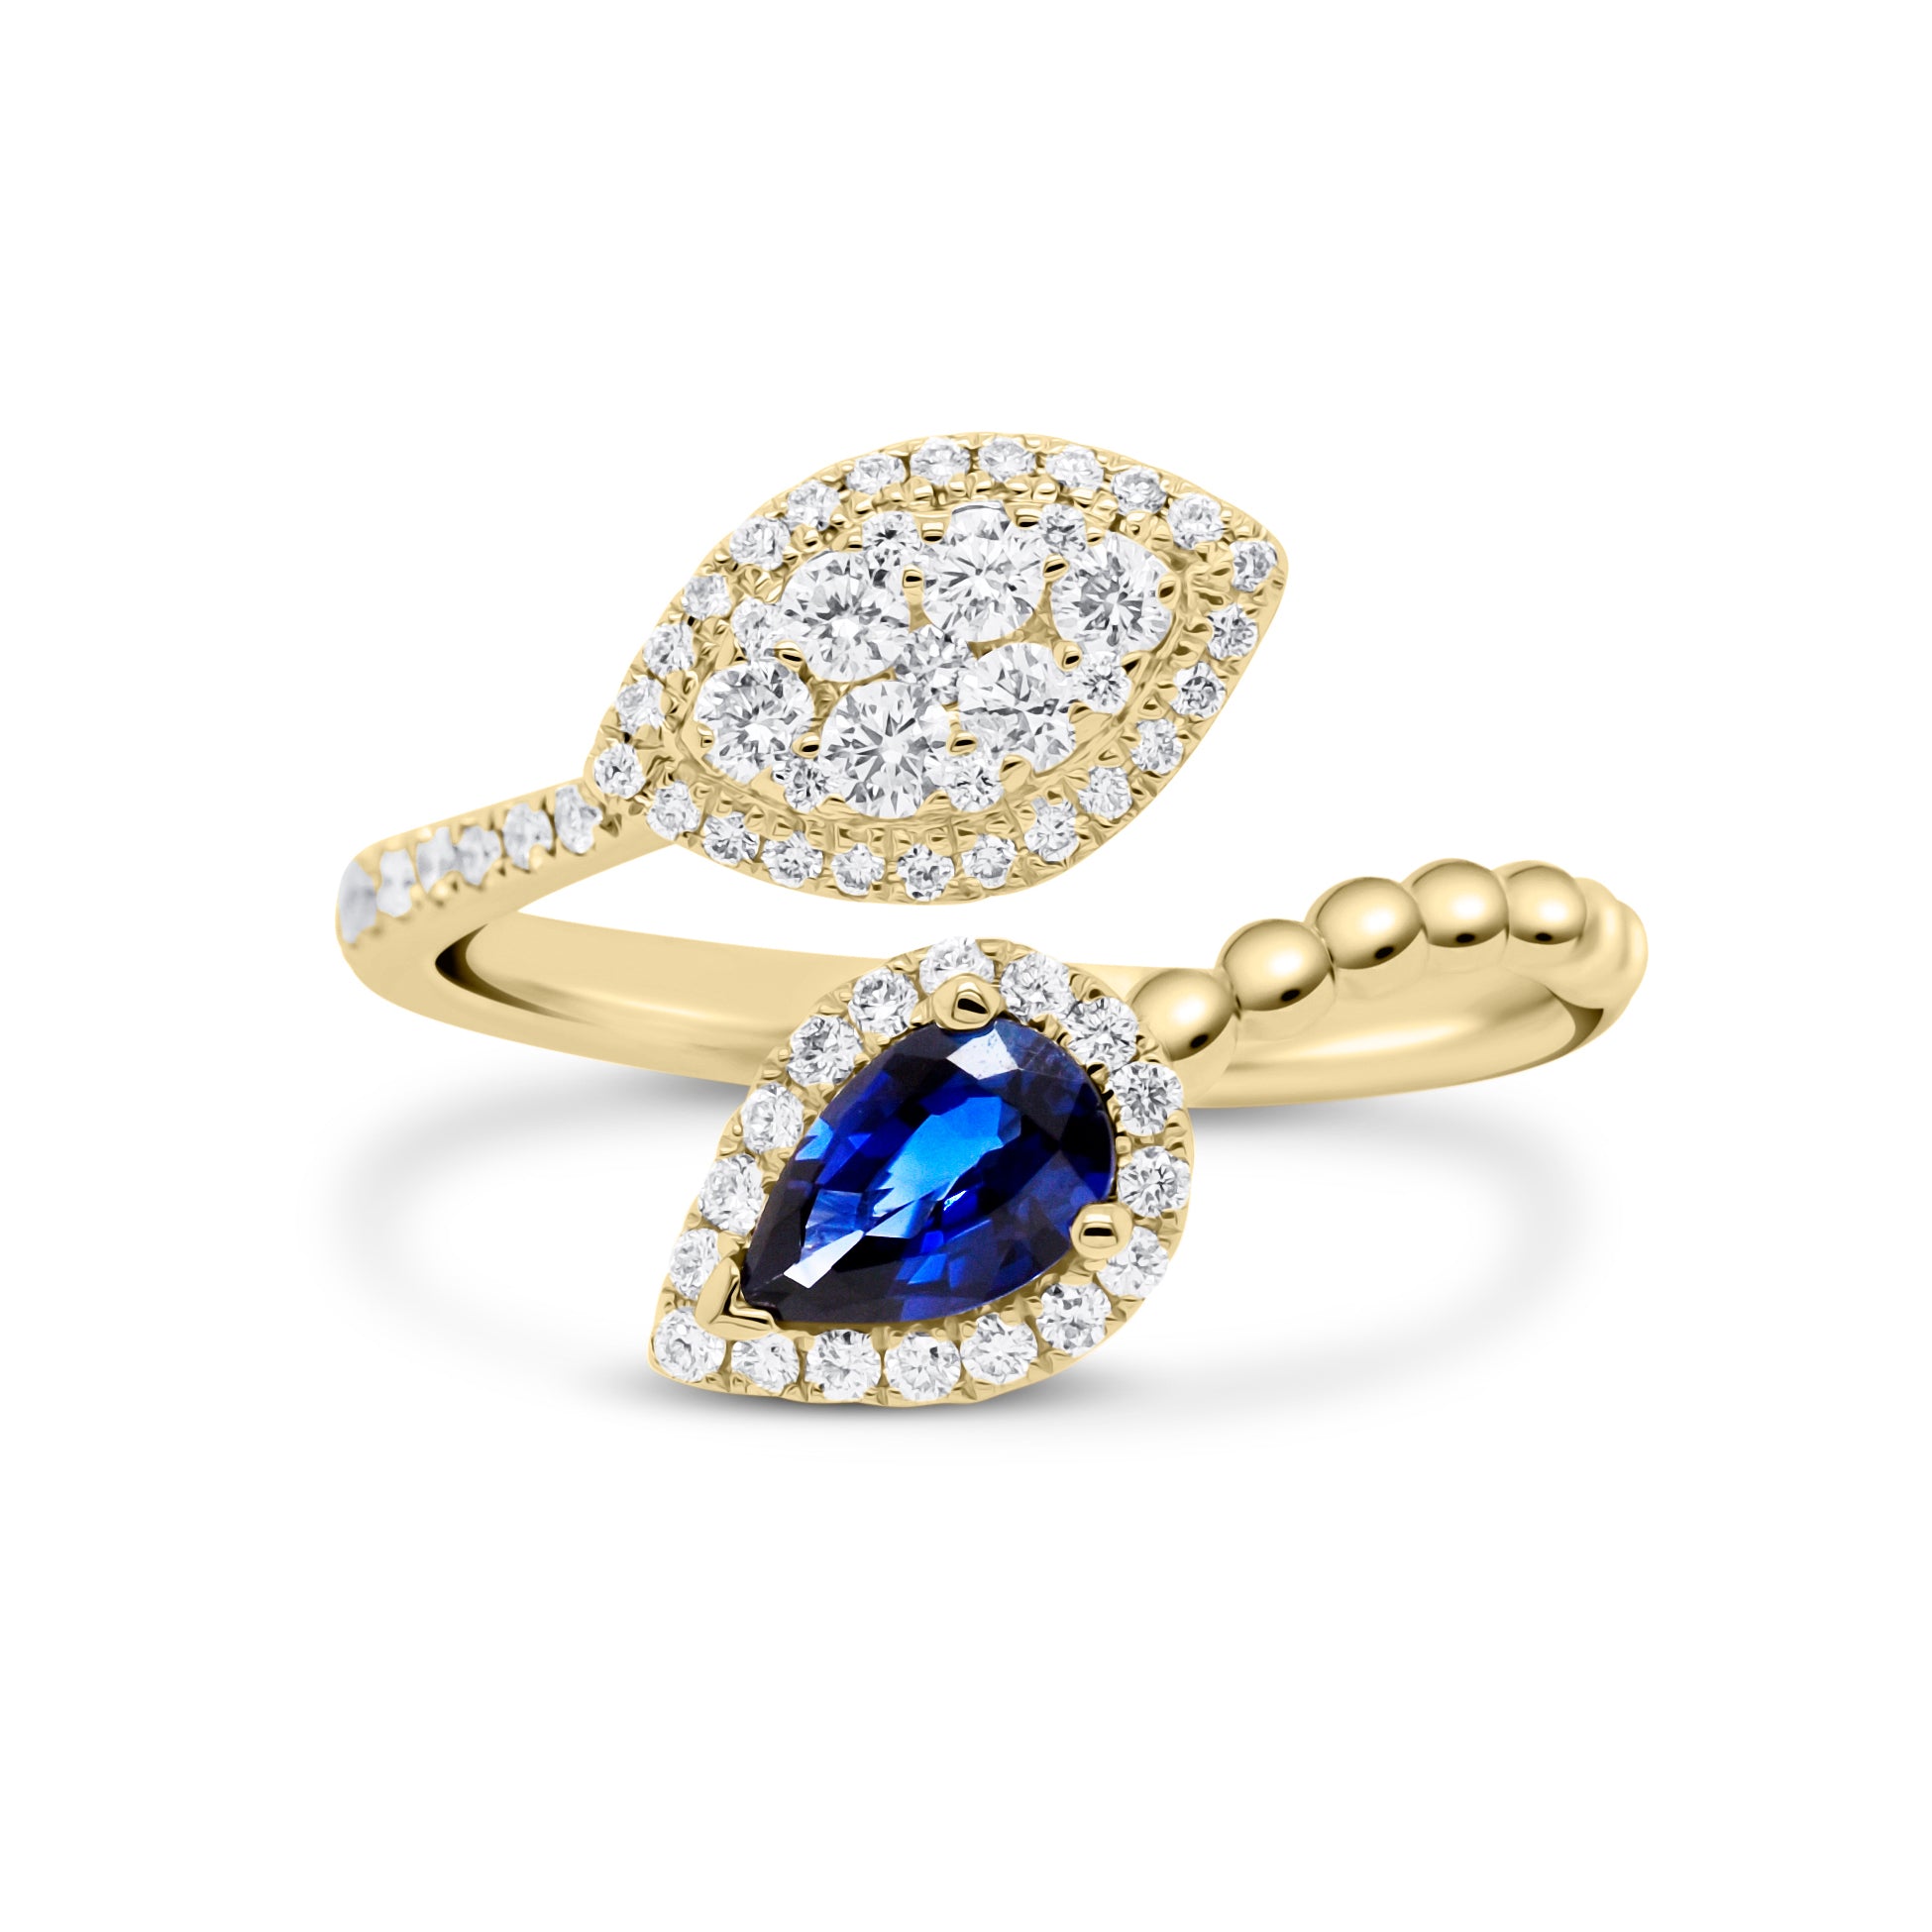 Sapphire teardrop and diamond marquise bypass ring - 18K gold weighing 2.97 grams  - 65 round diamonds totaling 0.40 carats  - 0.45 ct pear brilliant sapphire